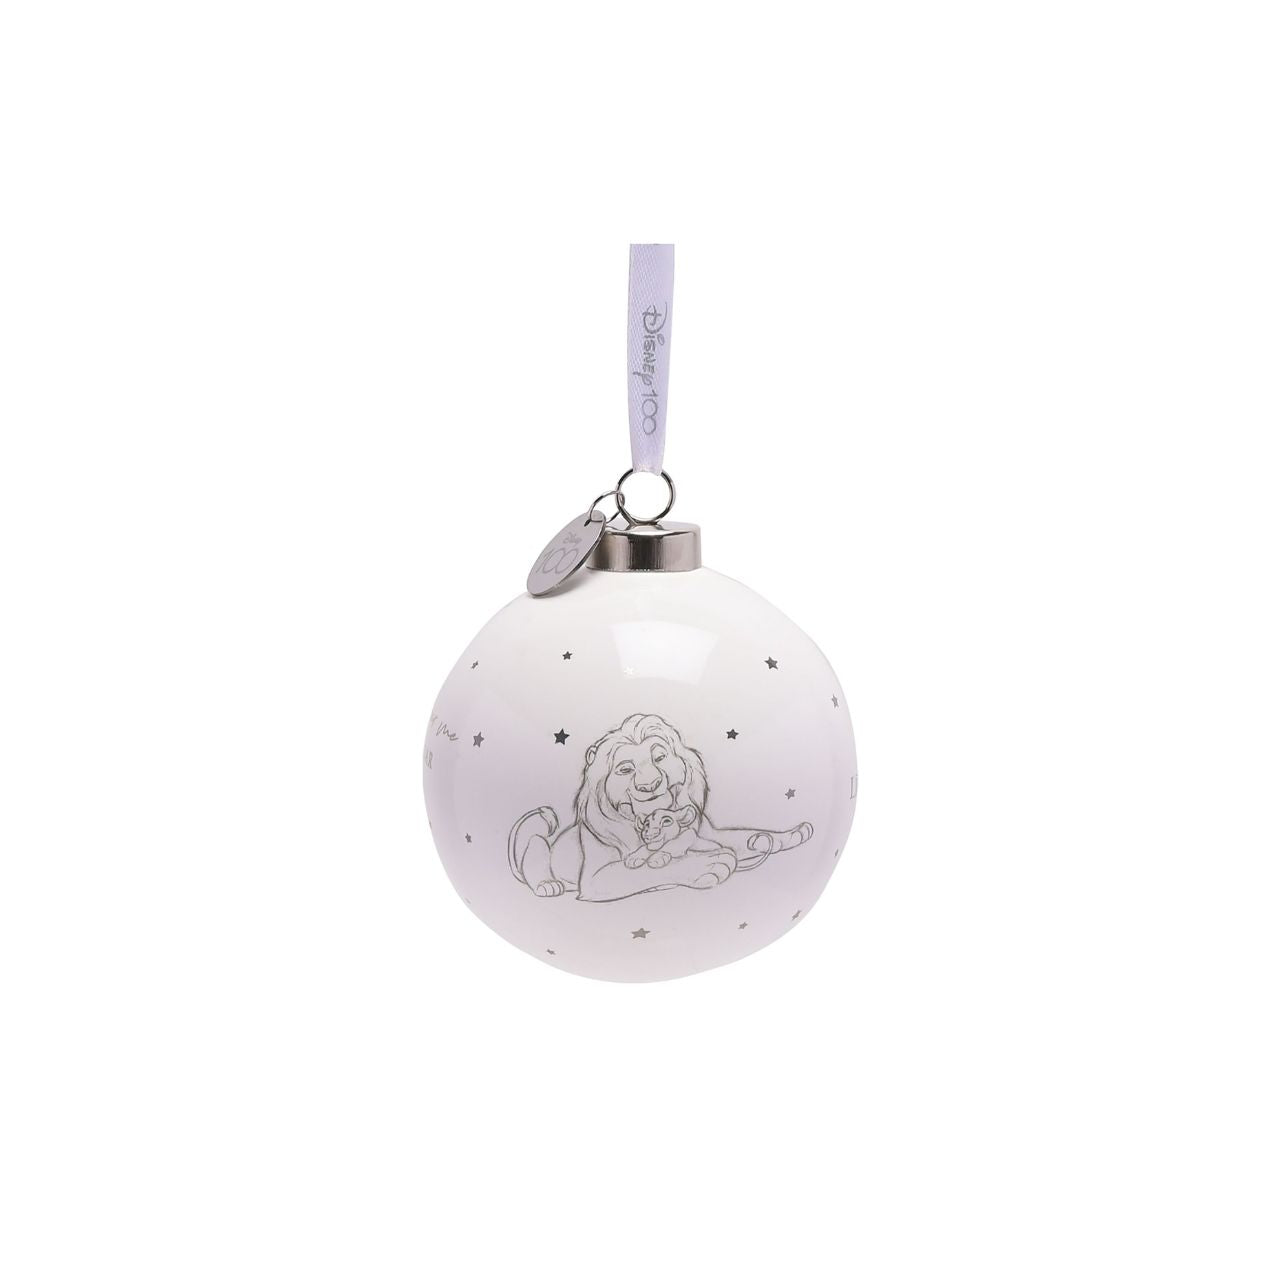 Disney 100th Anniversary Bauble - Simba  A Simba bauble from Disney 100 by DISNEY®.  This limited edition tree decoration captures the true magic of Disney on its centenary and can be enjoyed by fans of all ages at Christmas.